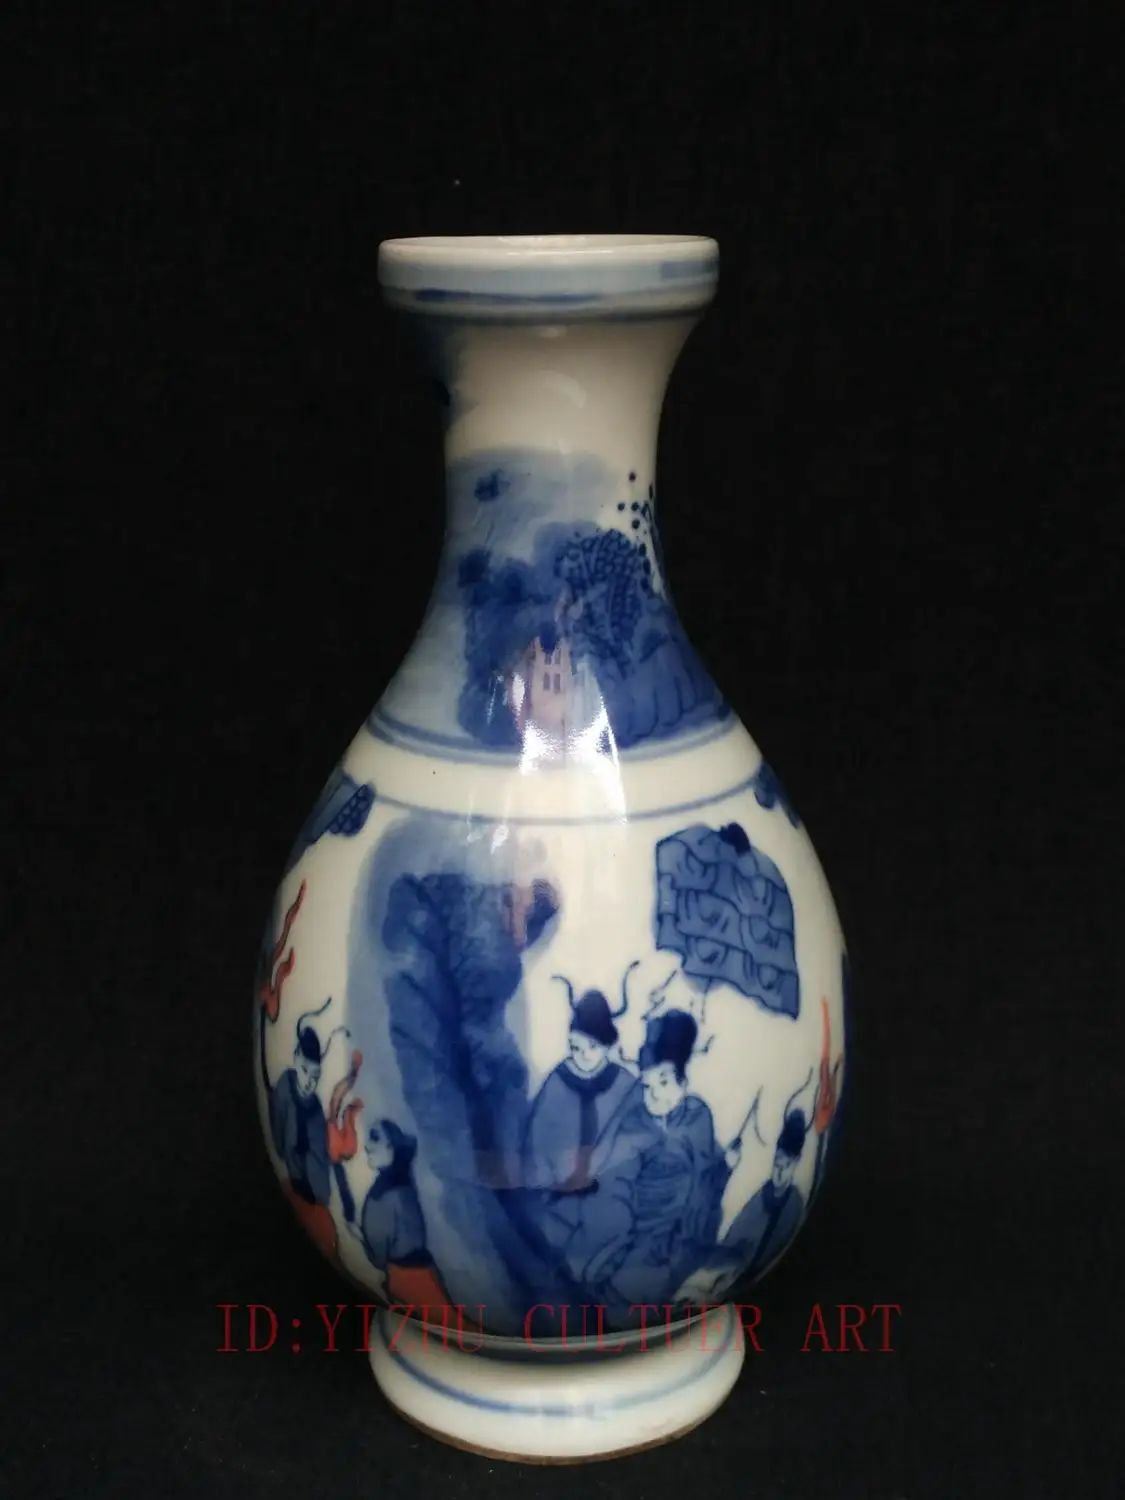 

YIZHU CULTUER ART Collect Ancient China Blue and white porcelain Painting Riding Horse Figure Vase